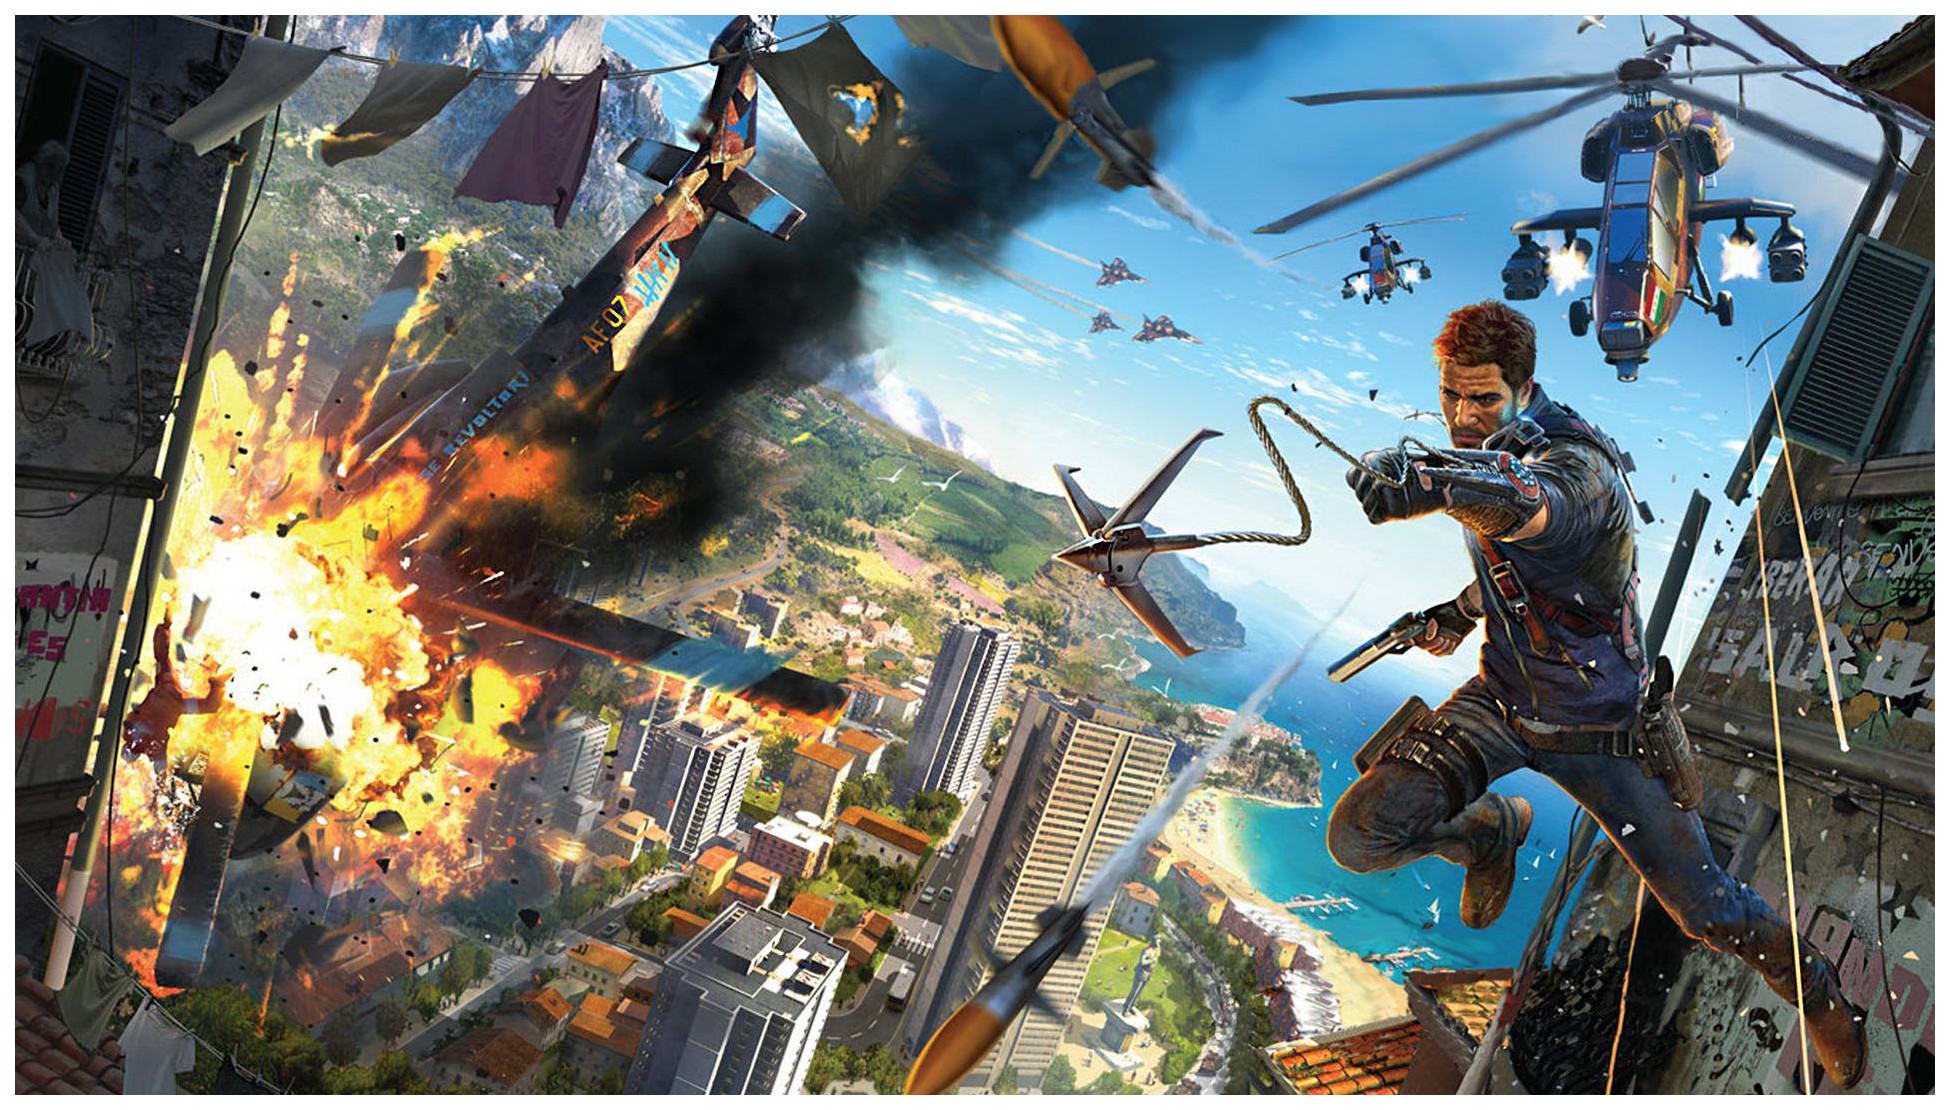 Игра just cause 3. Just cause игра 5. Just cause 3 Gold Edition ps4. Just cause 3 обложка.